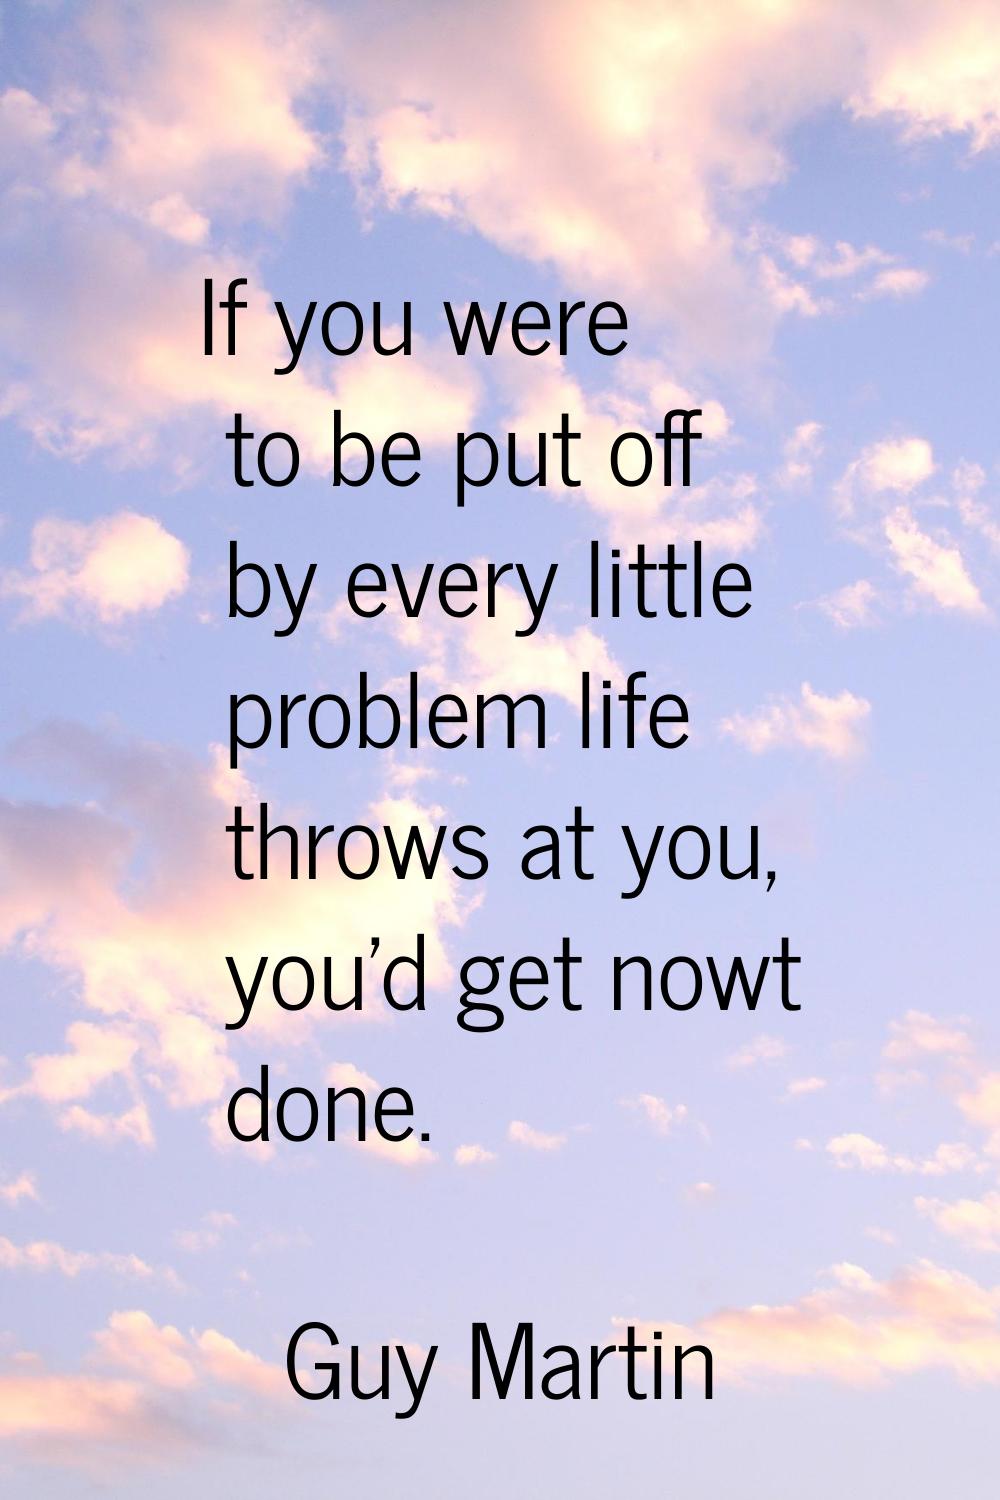 If you were to be put off by every little problem life throws at you, you'd get nowt done.